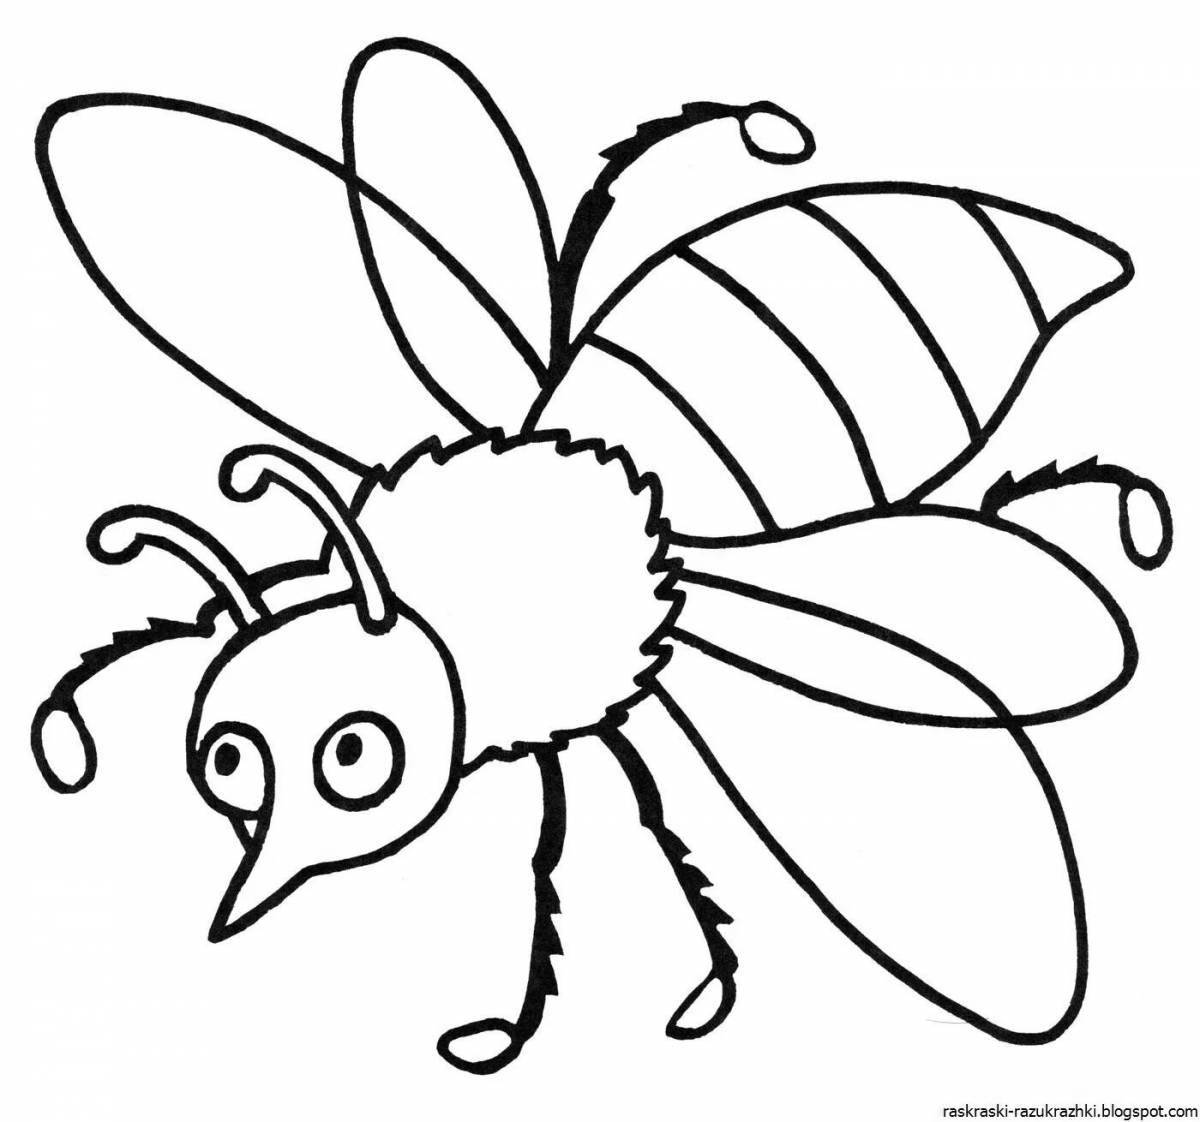 Colorful insect coloring page for 6-7 year olds